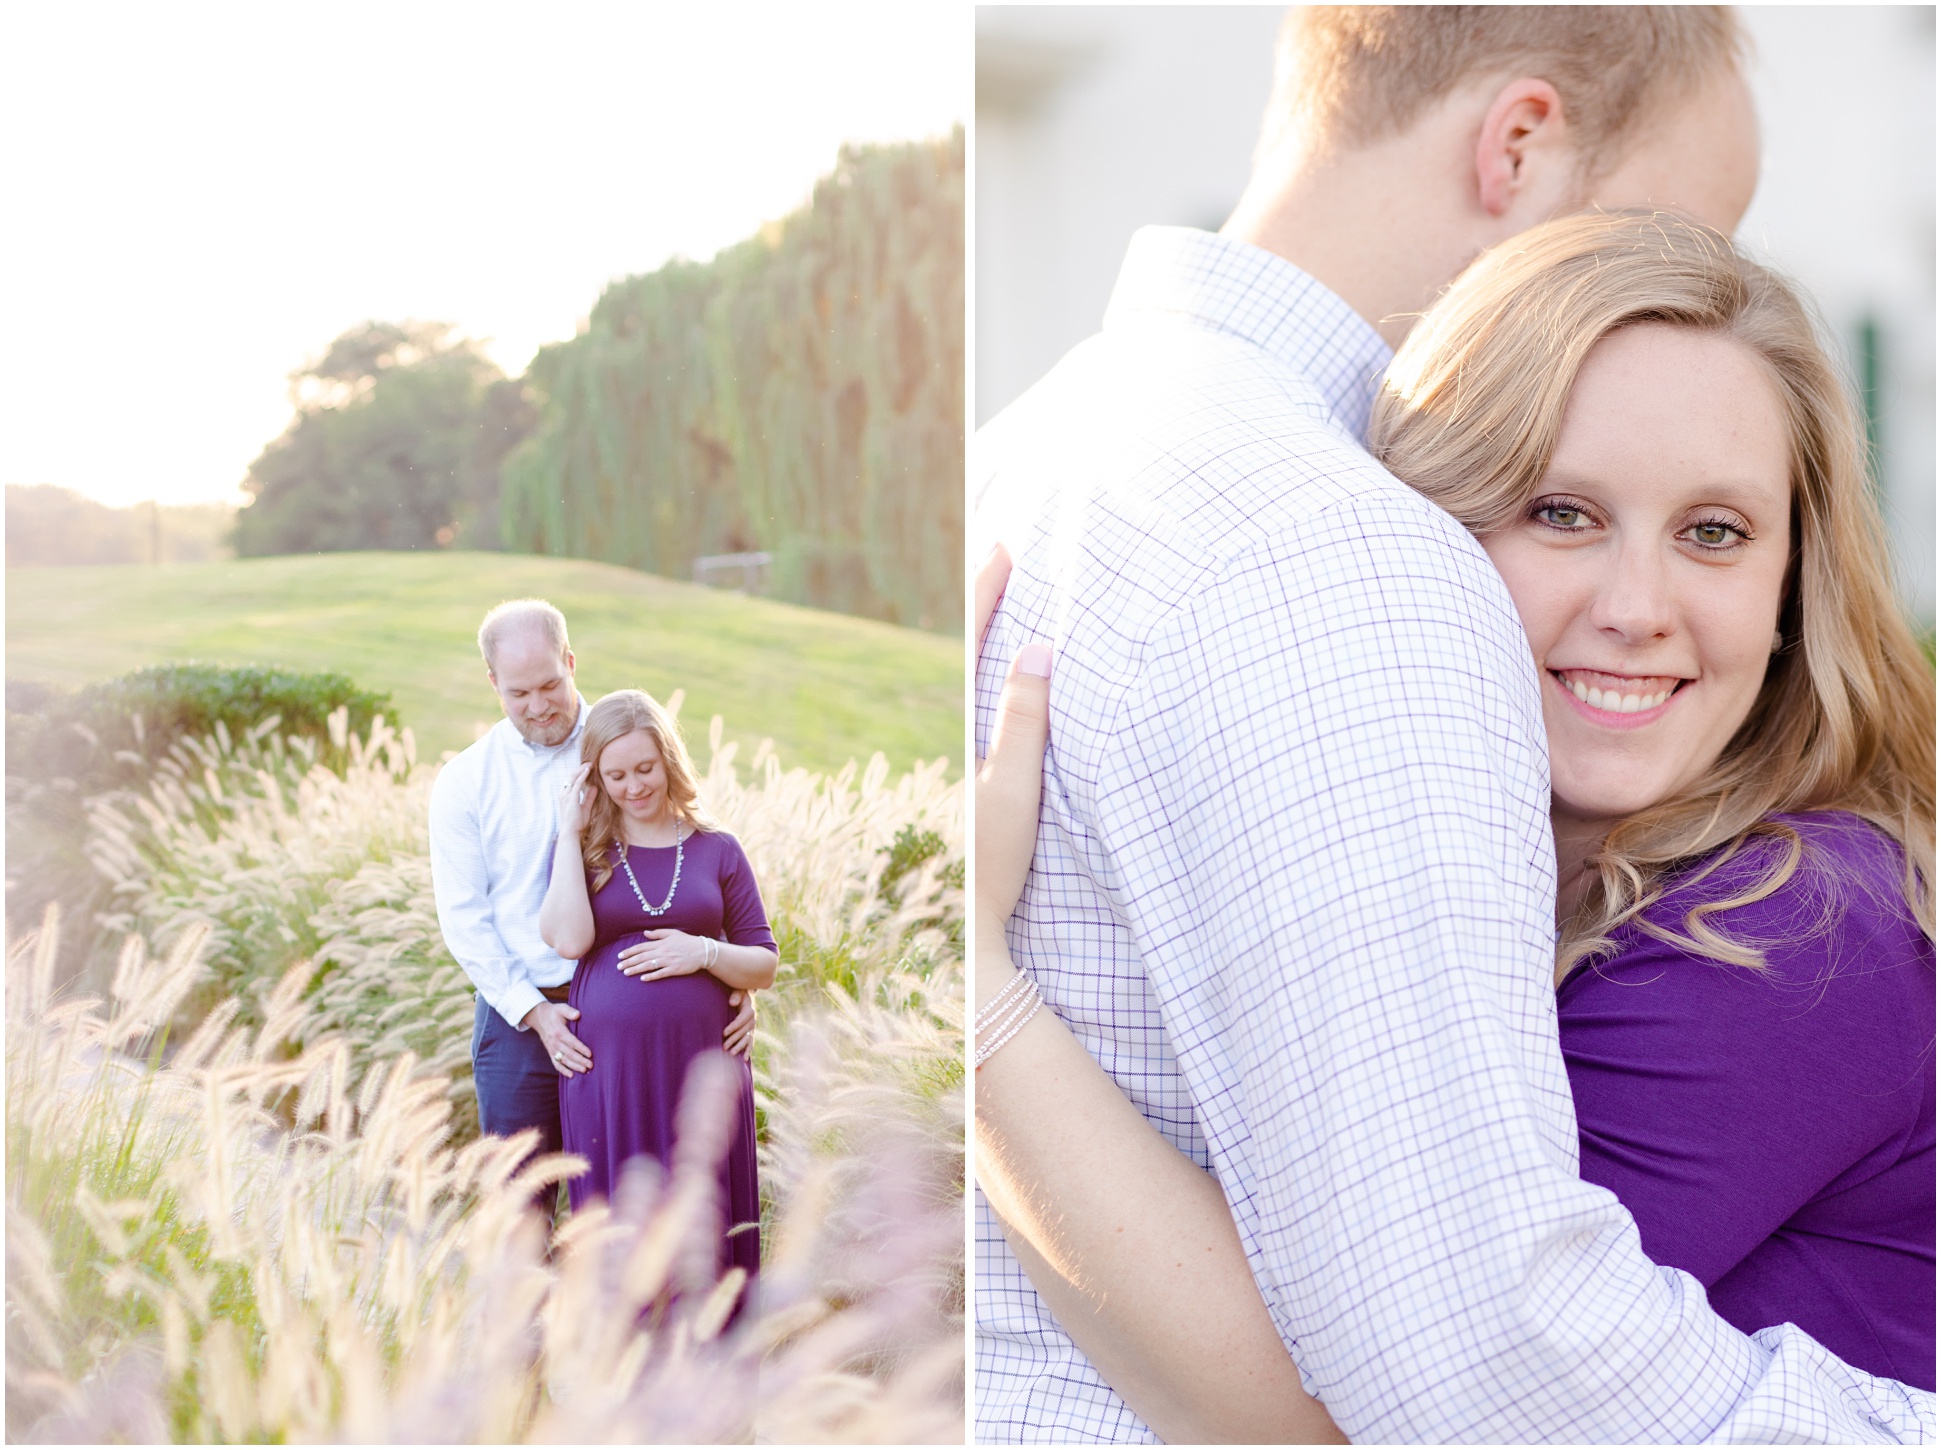 Two images of Kelly and Chris's maternity session at Swan Harbor Farm